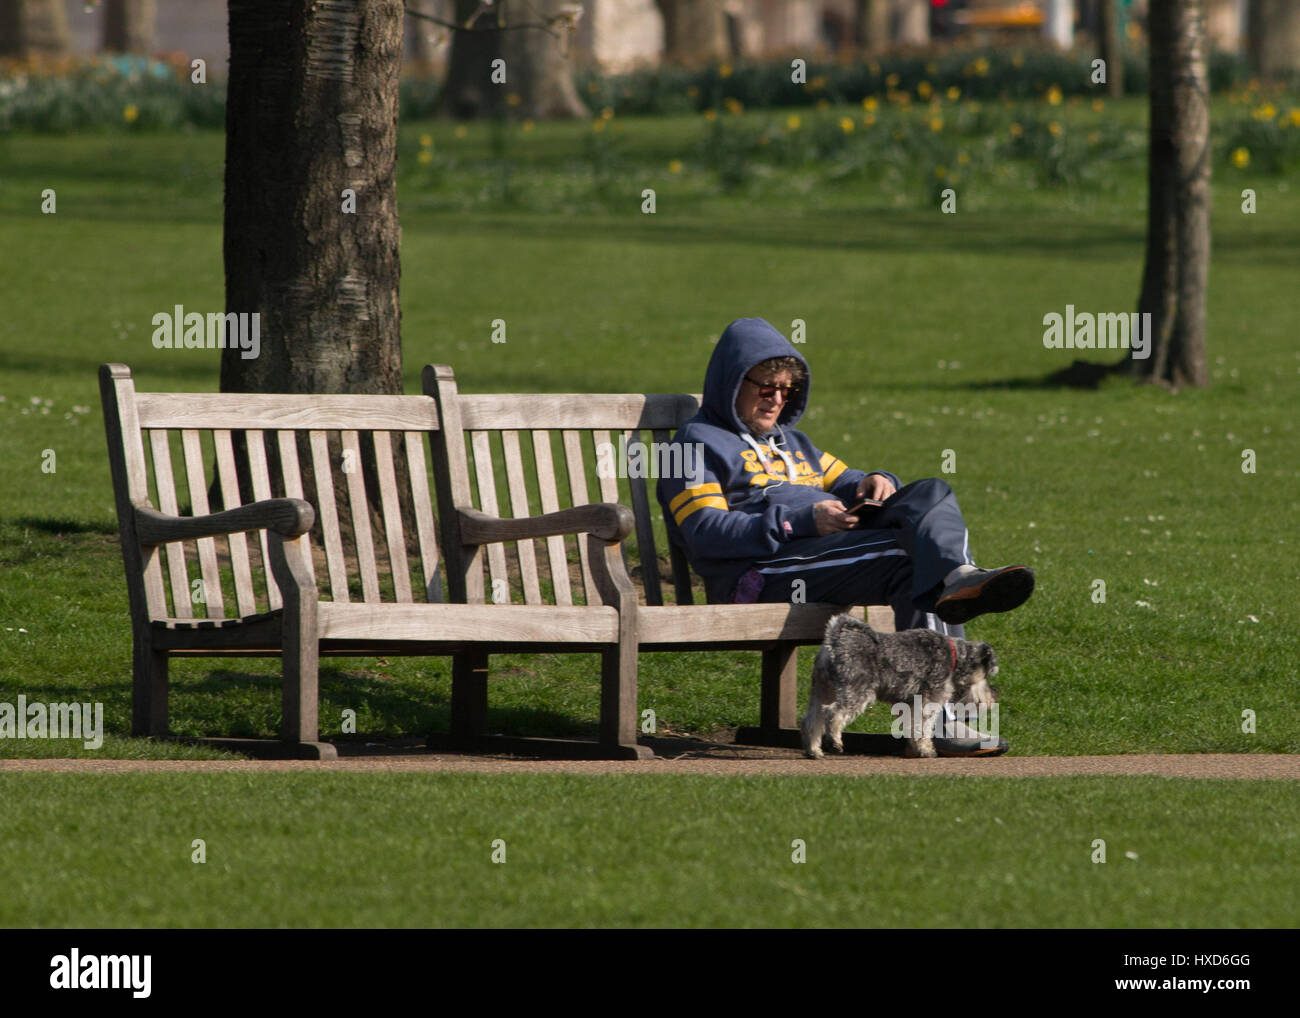 London, UK. 28th March 2017. UK Weather: Sunny in London. People having fun in St James Park, London. 28/03/17 Credit: Sebastian Remme/Alamy Live News Stock Photo